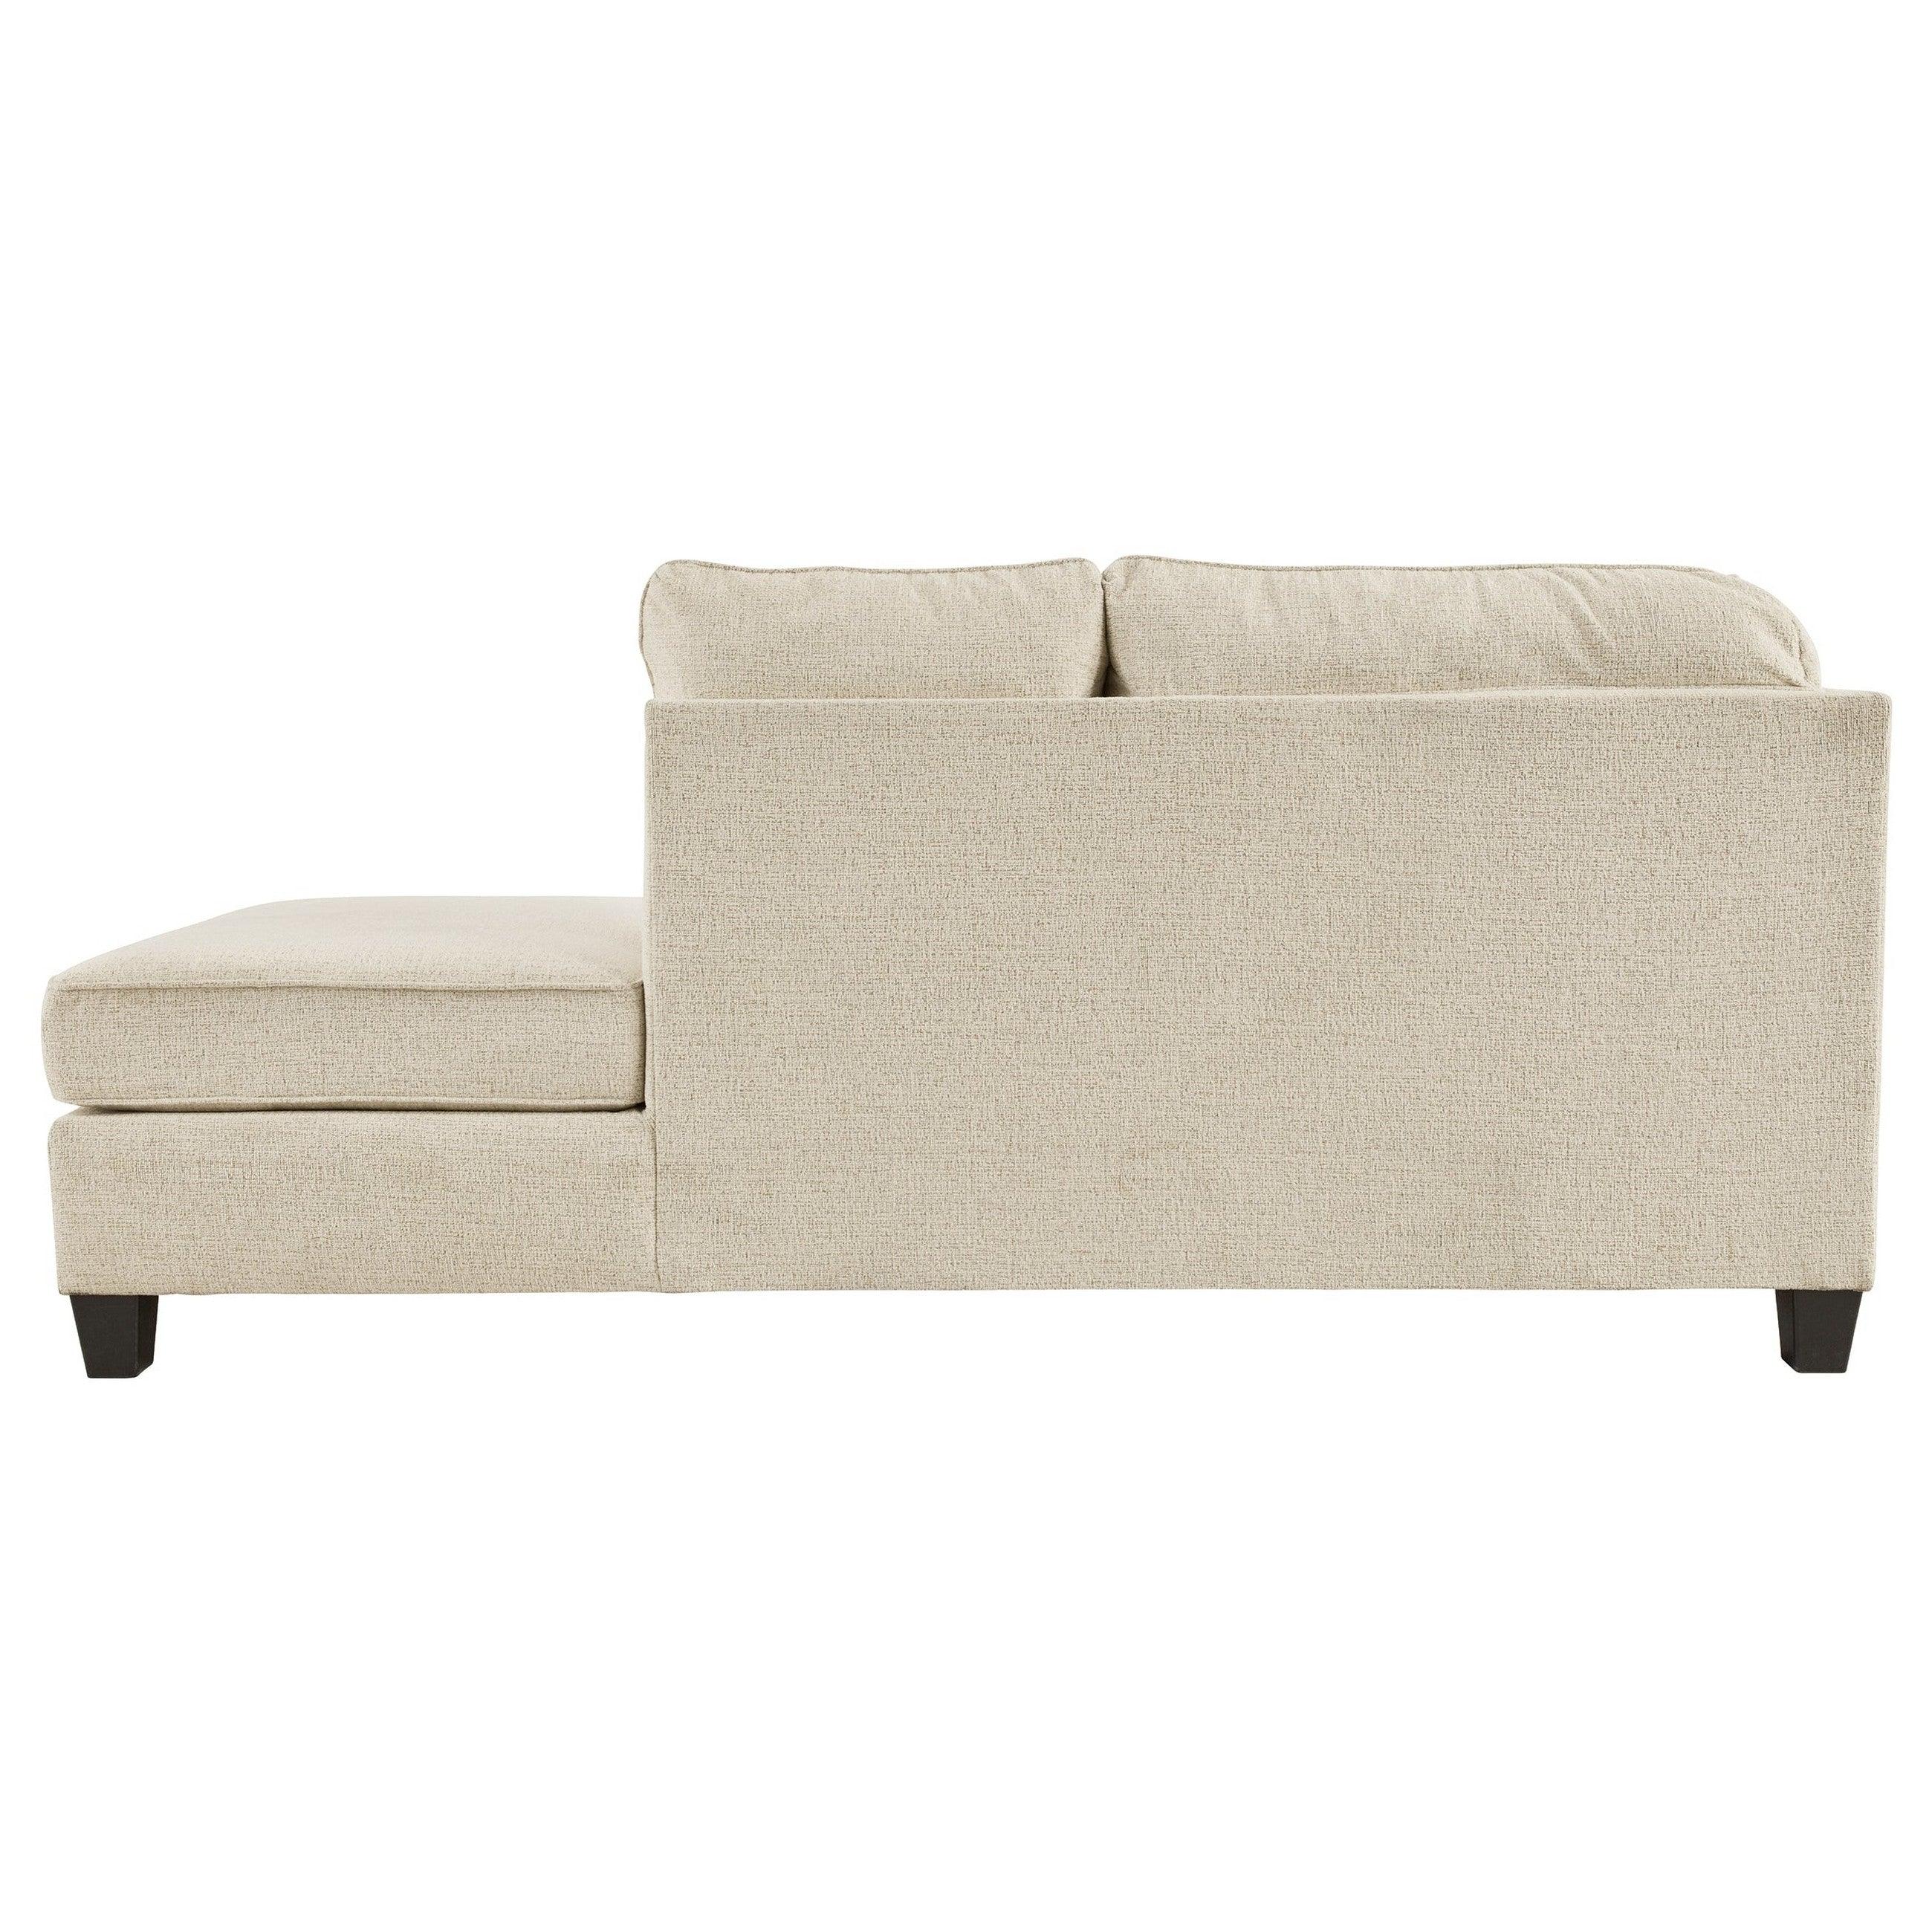 Abinger 2-Piece Sectional with Chaise - Ash-83904S2 - Underkut